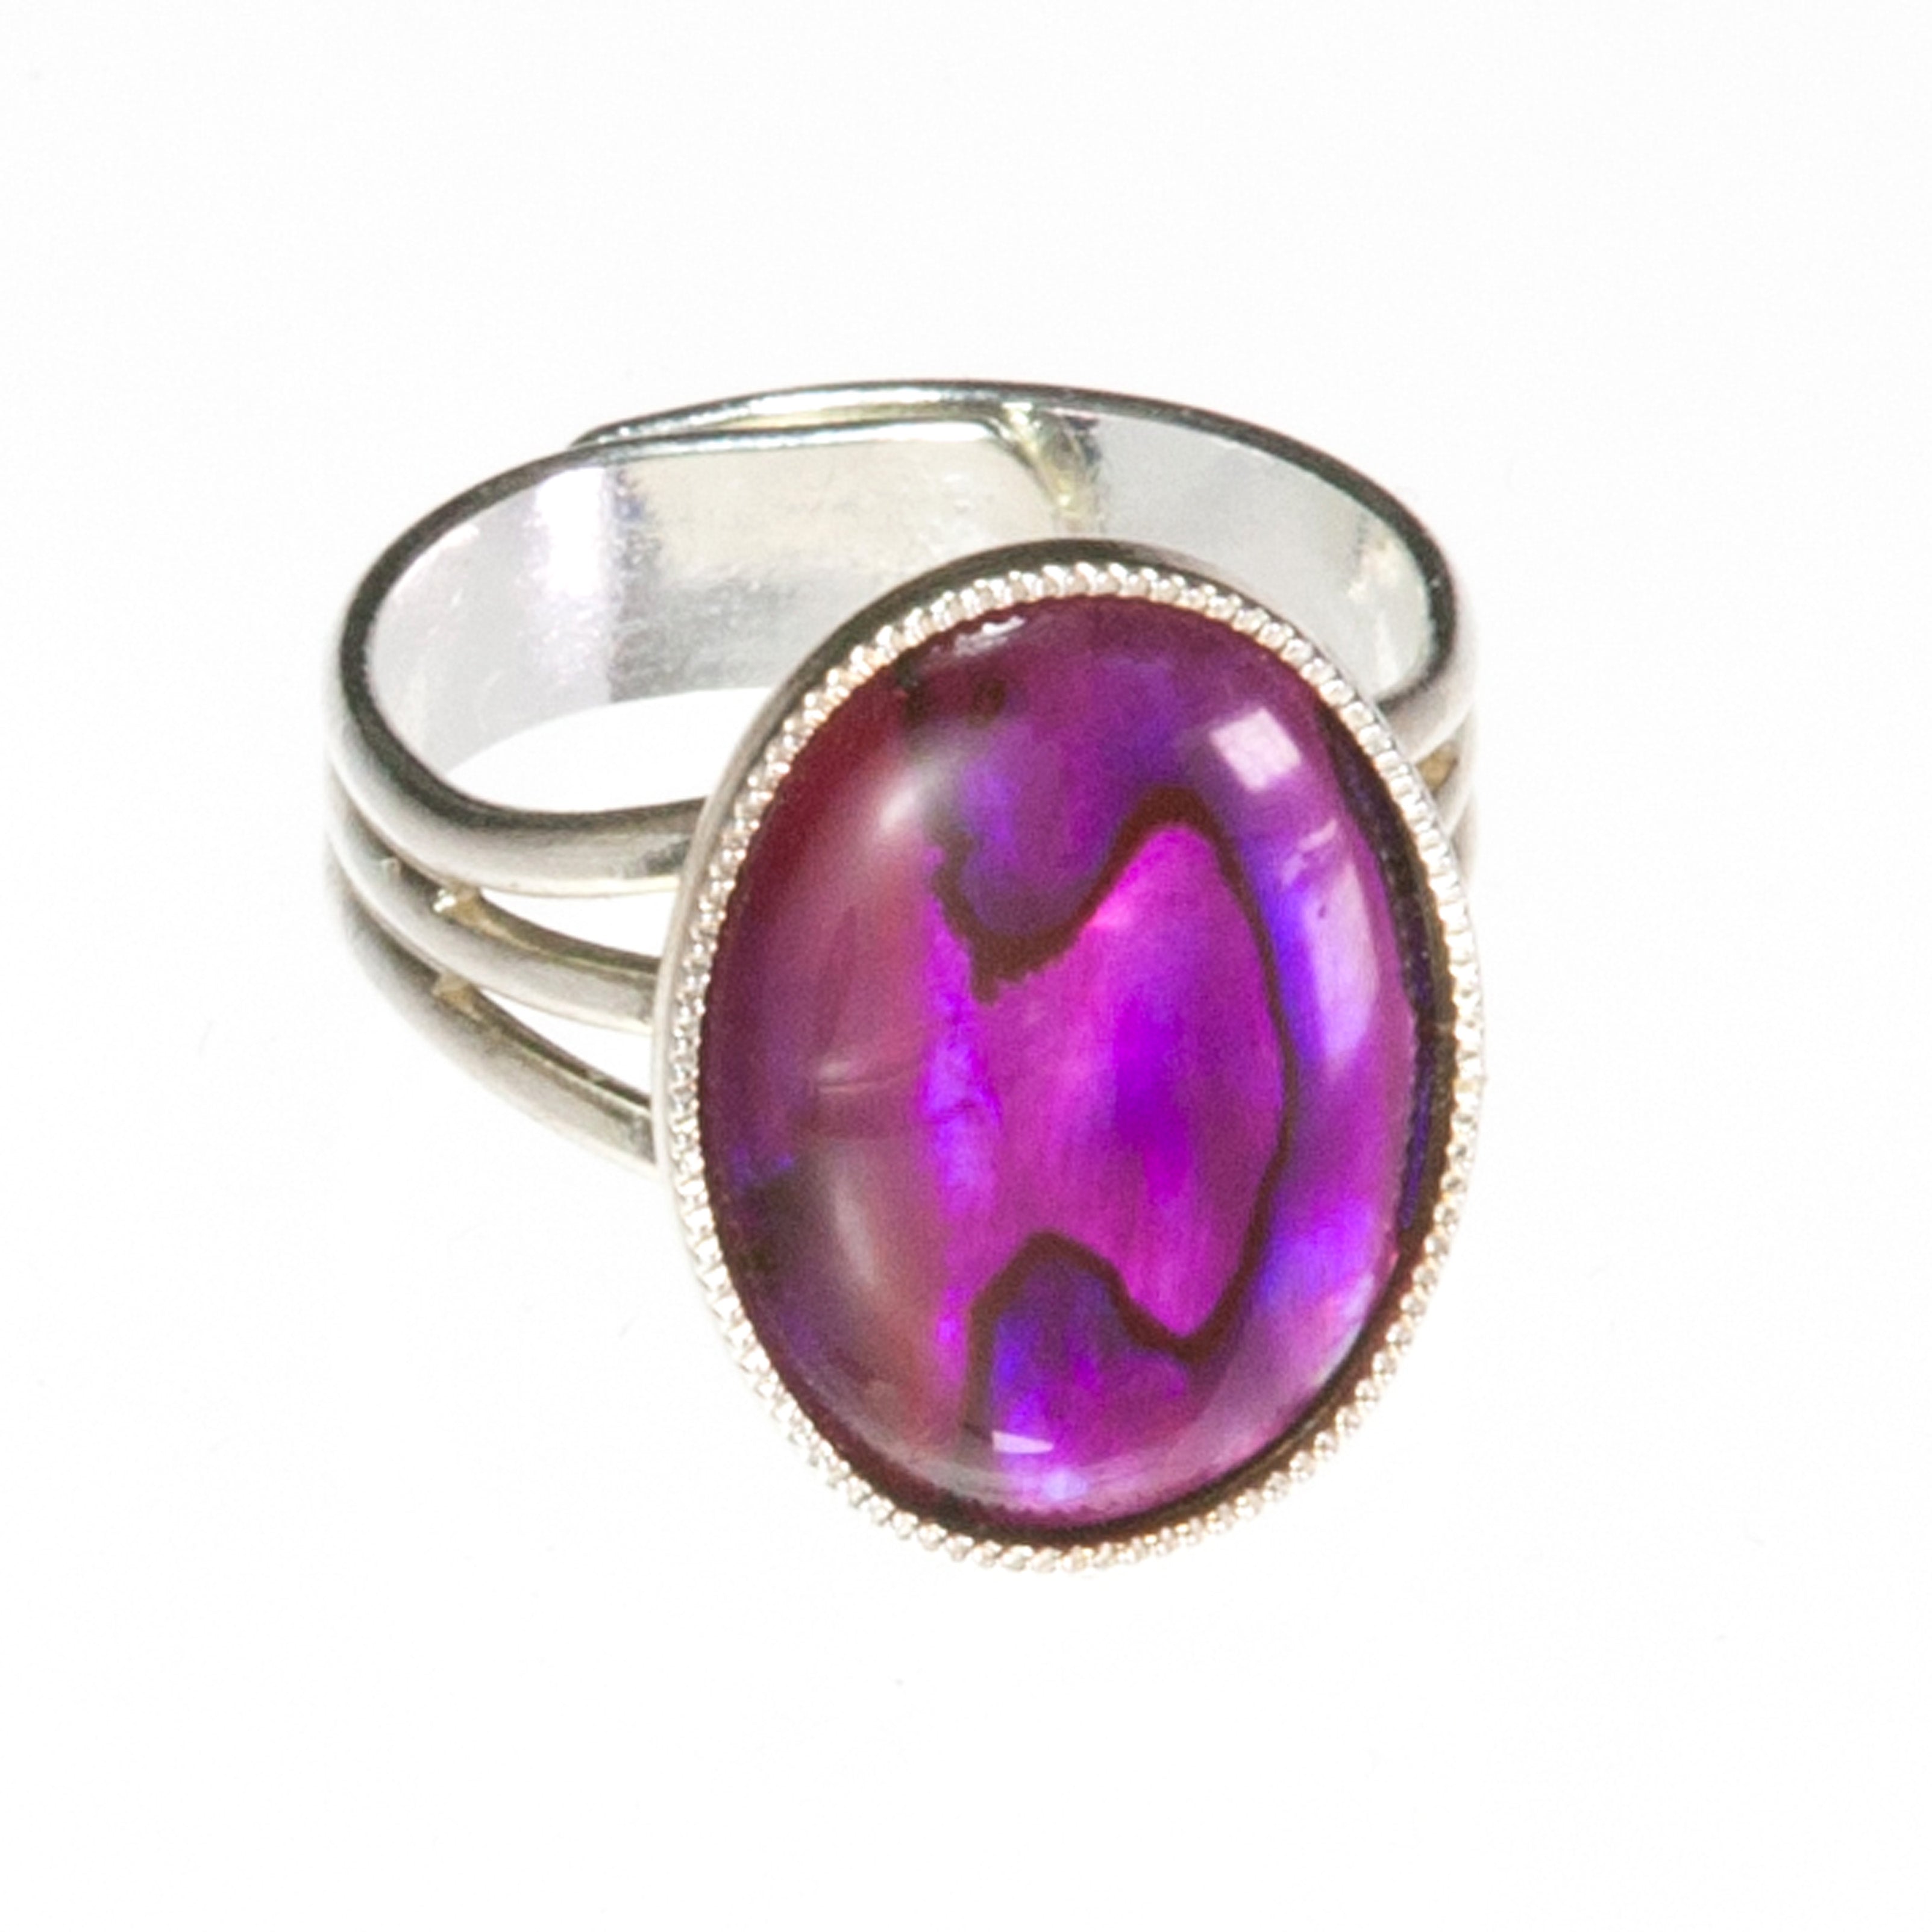 Bright Pink/Purple Abalone Shell Oval Ring - adjustable